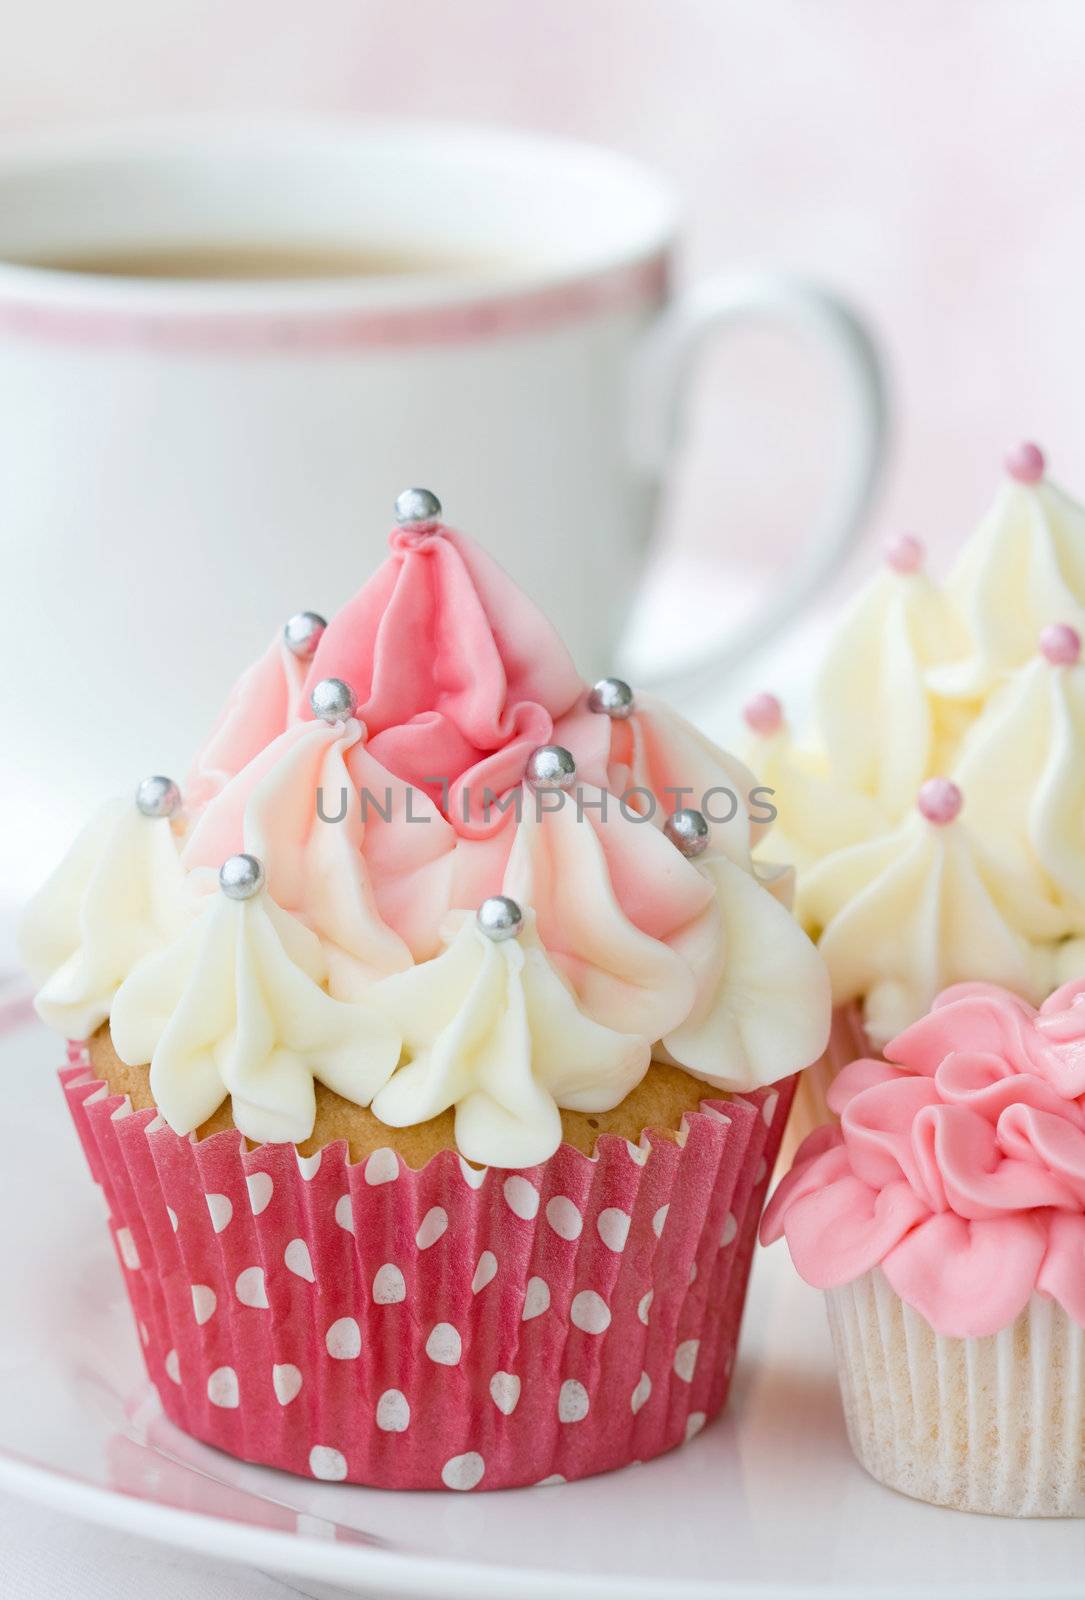 Selection of delicious cupcakes served with a cup of tea